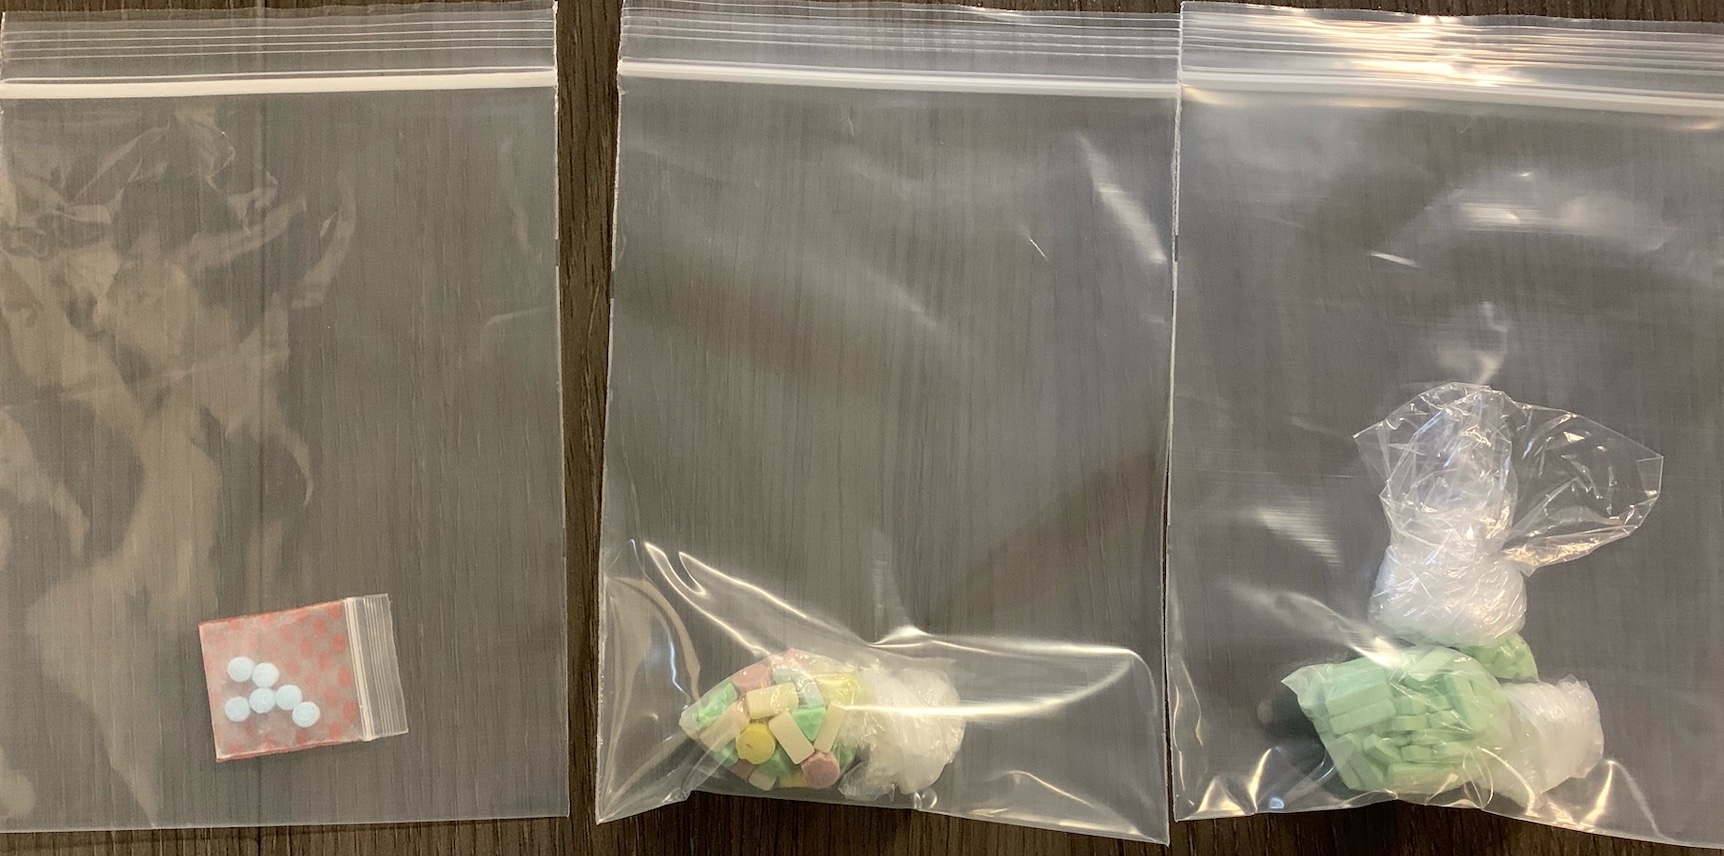 Controlled substances found in Morgan's possession; image courtesy of press release.